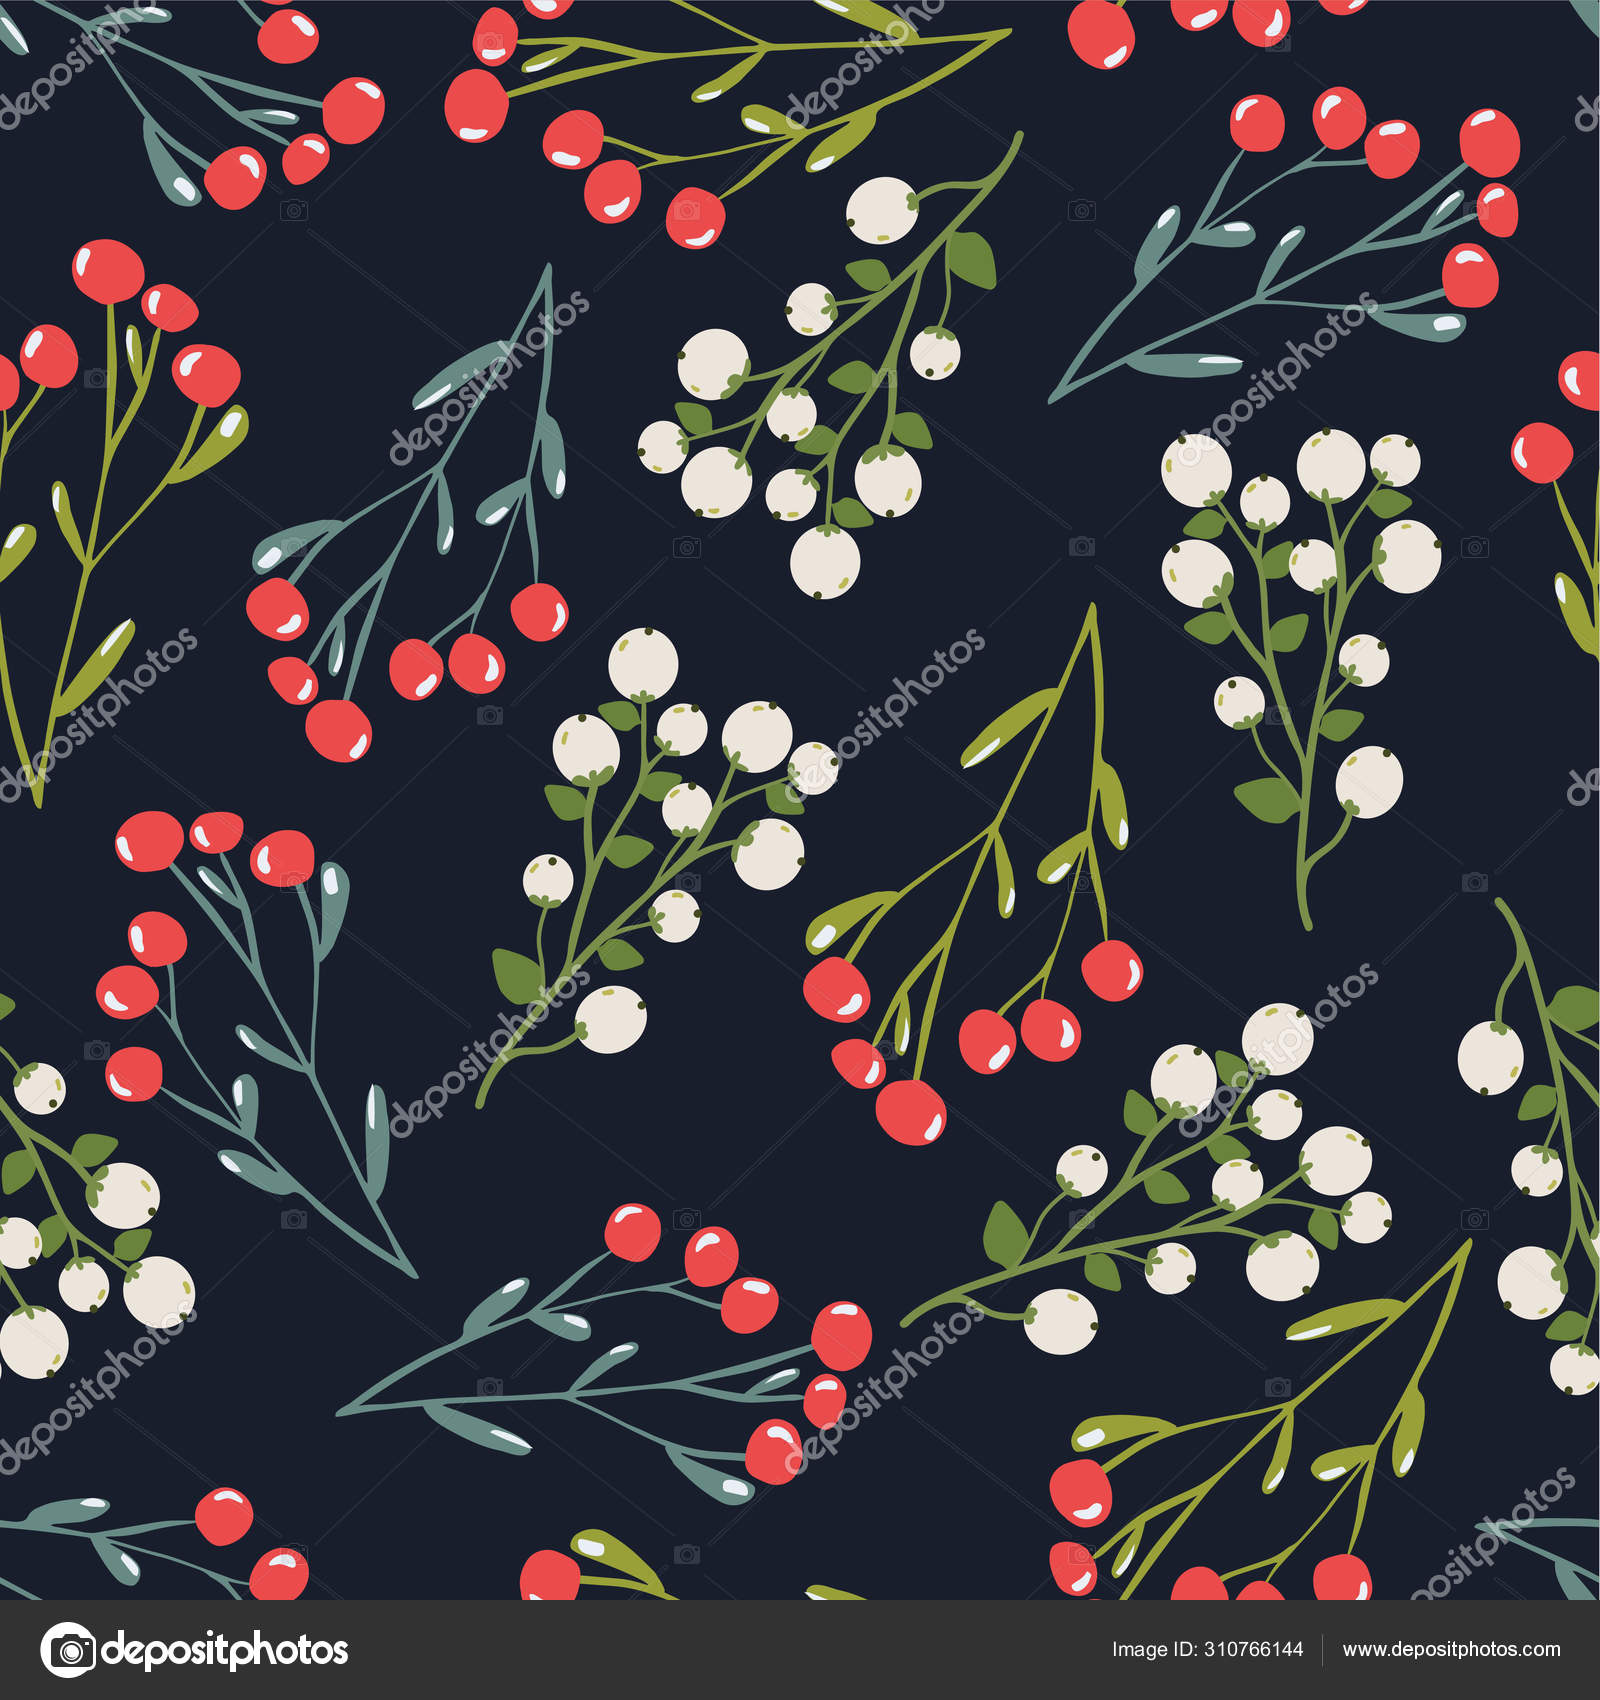 Seamless pattern with hand drawn poinsettia flowers and floral branches and  berries, mistletoe, christmas florals. Repeating background for wrapping  paper, fabric, stationary products decoration. Stock Vector by ©Saltoli  310224892